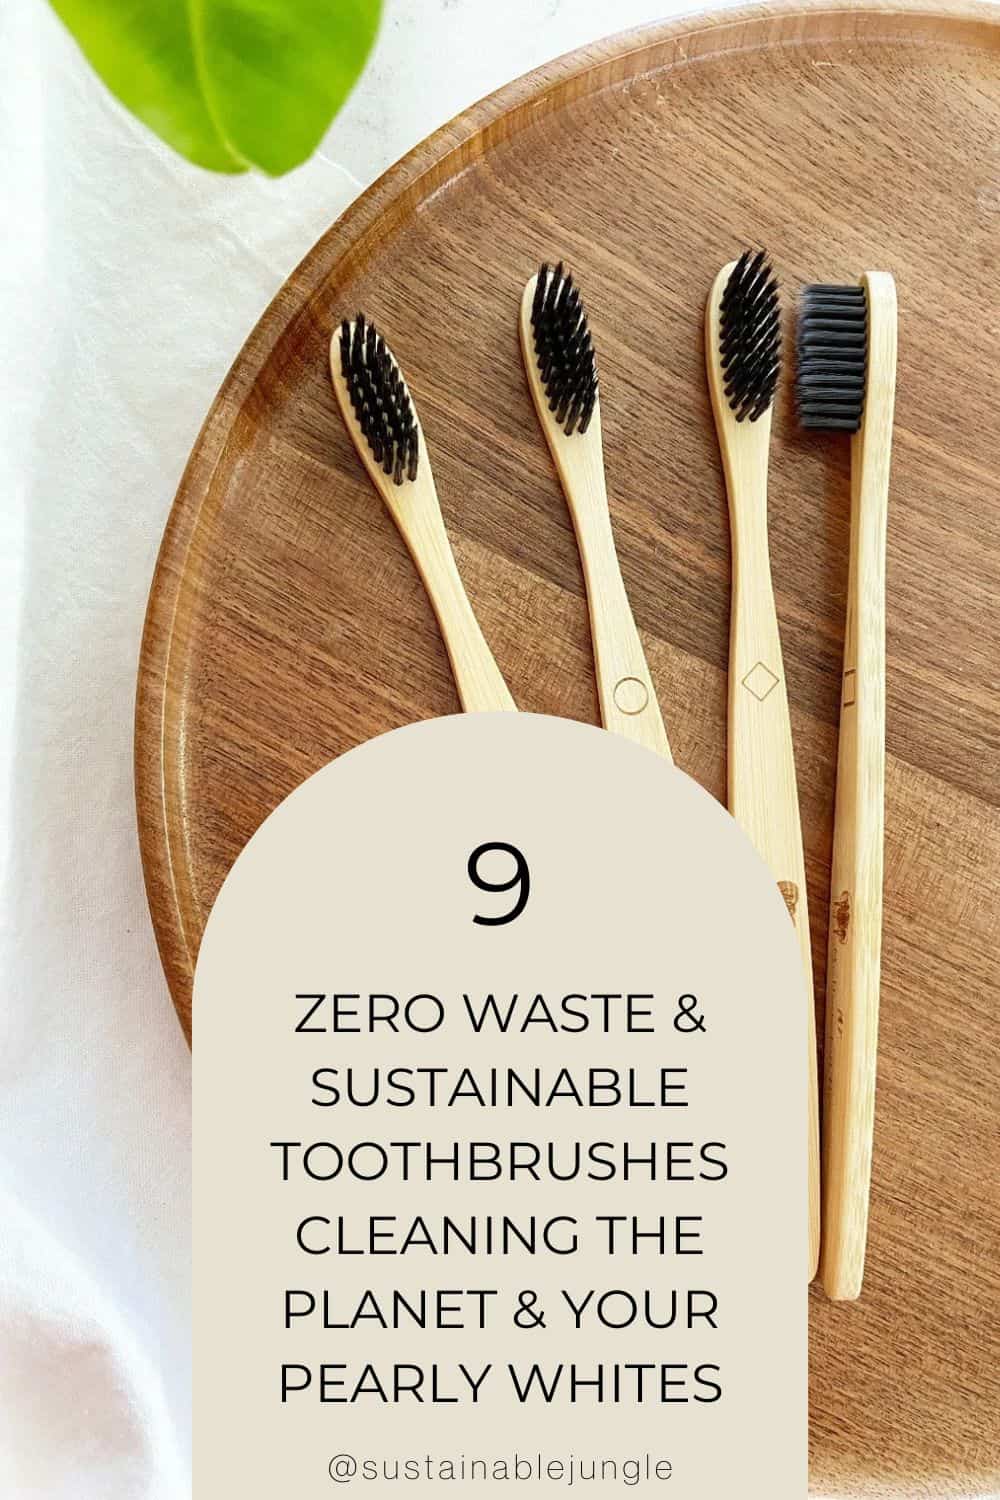 9 Zero Waste & Sustainable Toothbrushes Cleaning The Planet & Your Pearly Whites Image by Me Mother Earth #sustainabletoothbrushes #mostsustainabletoothbrush #sustainablebambootoothbrush #zerowastetoothbrush #bestzerowastetoothbrush #bambootoothbrushzerowaste #sustainablejungle